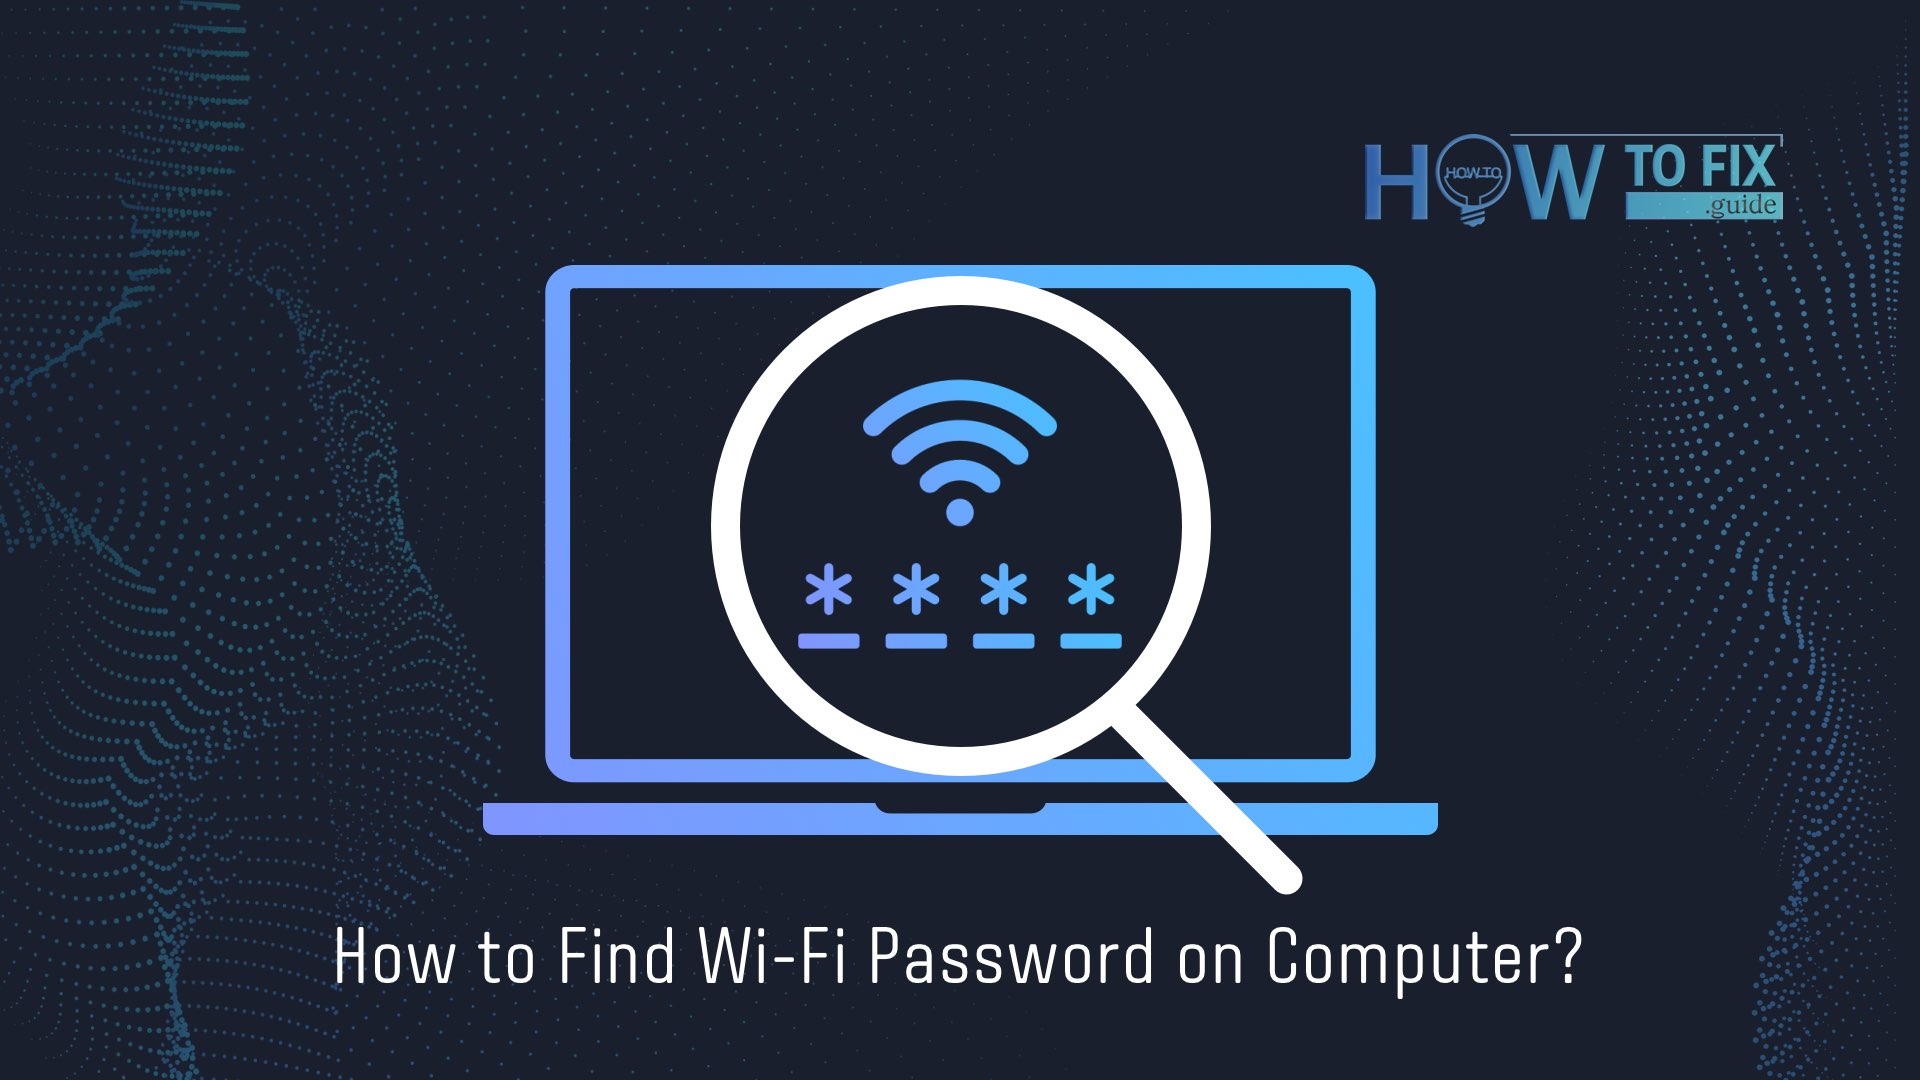 How to Find Wi-Fi Password on Computer